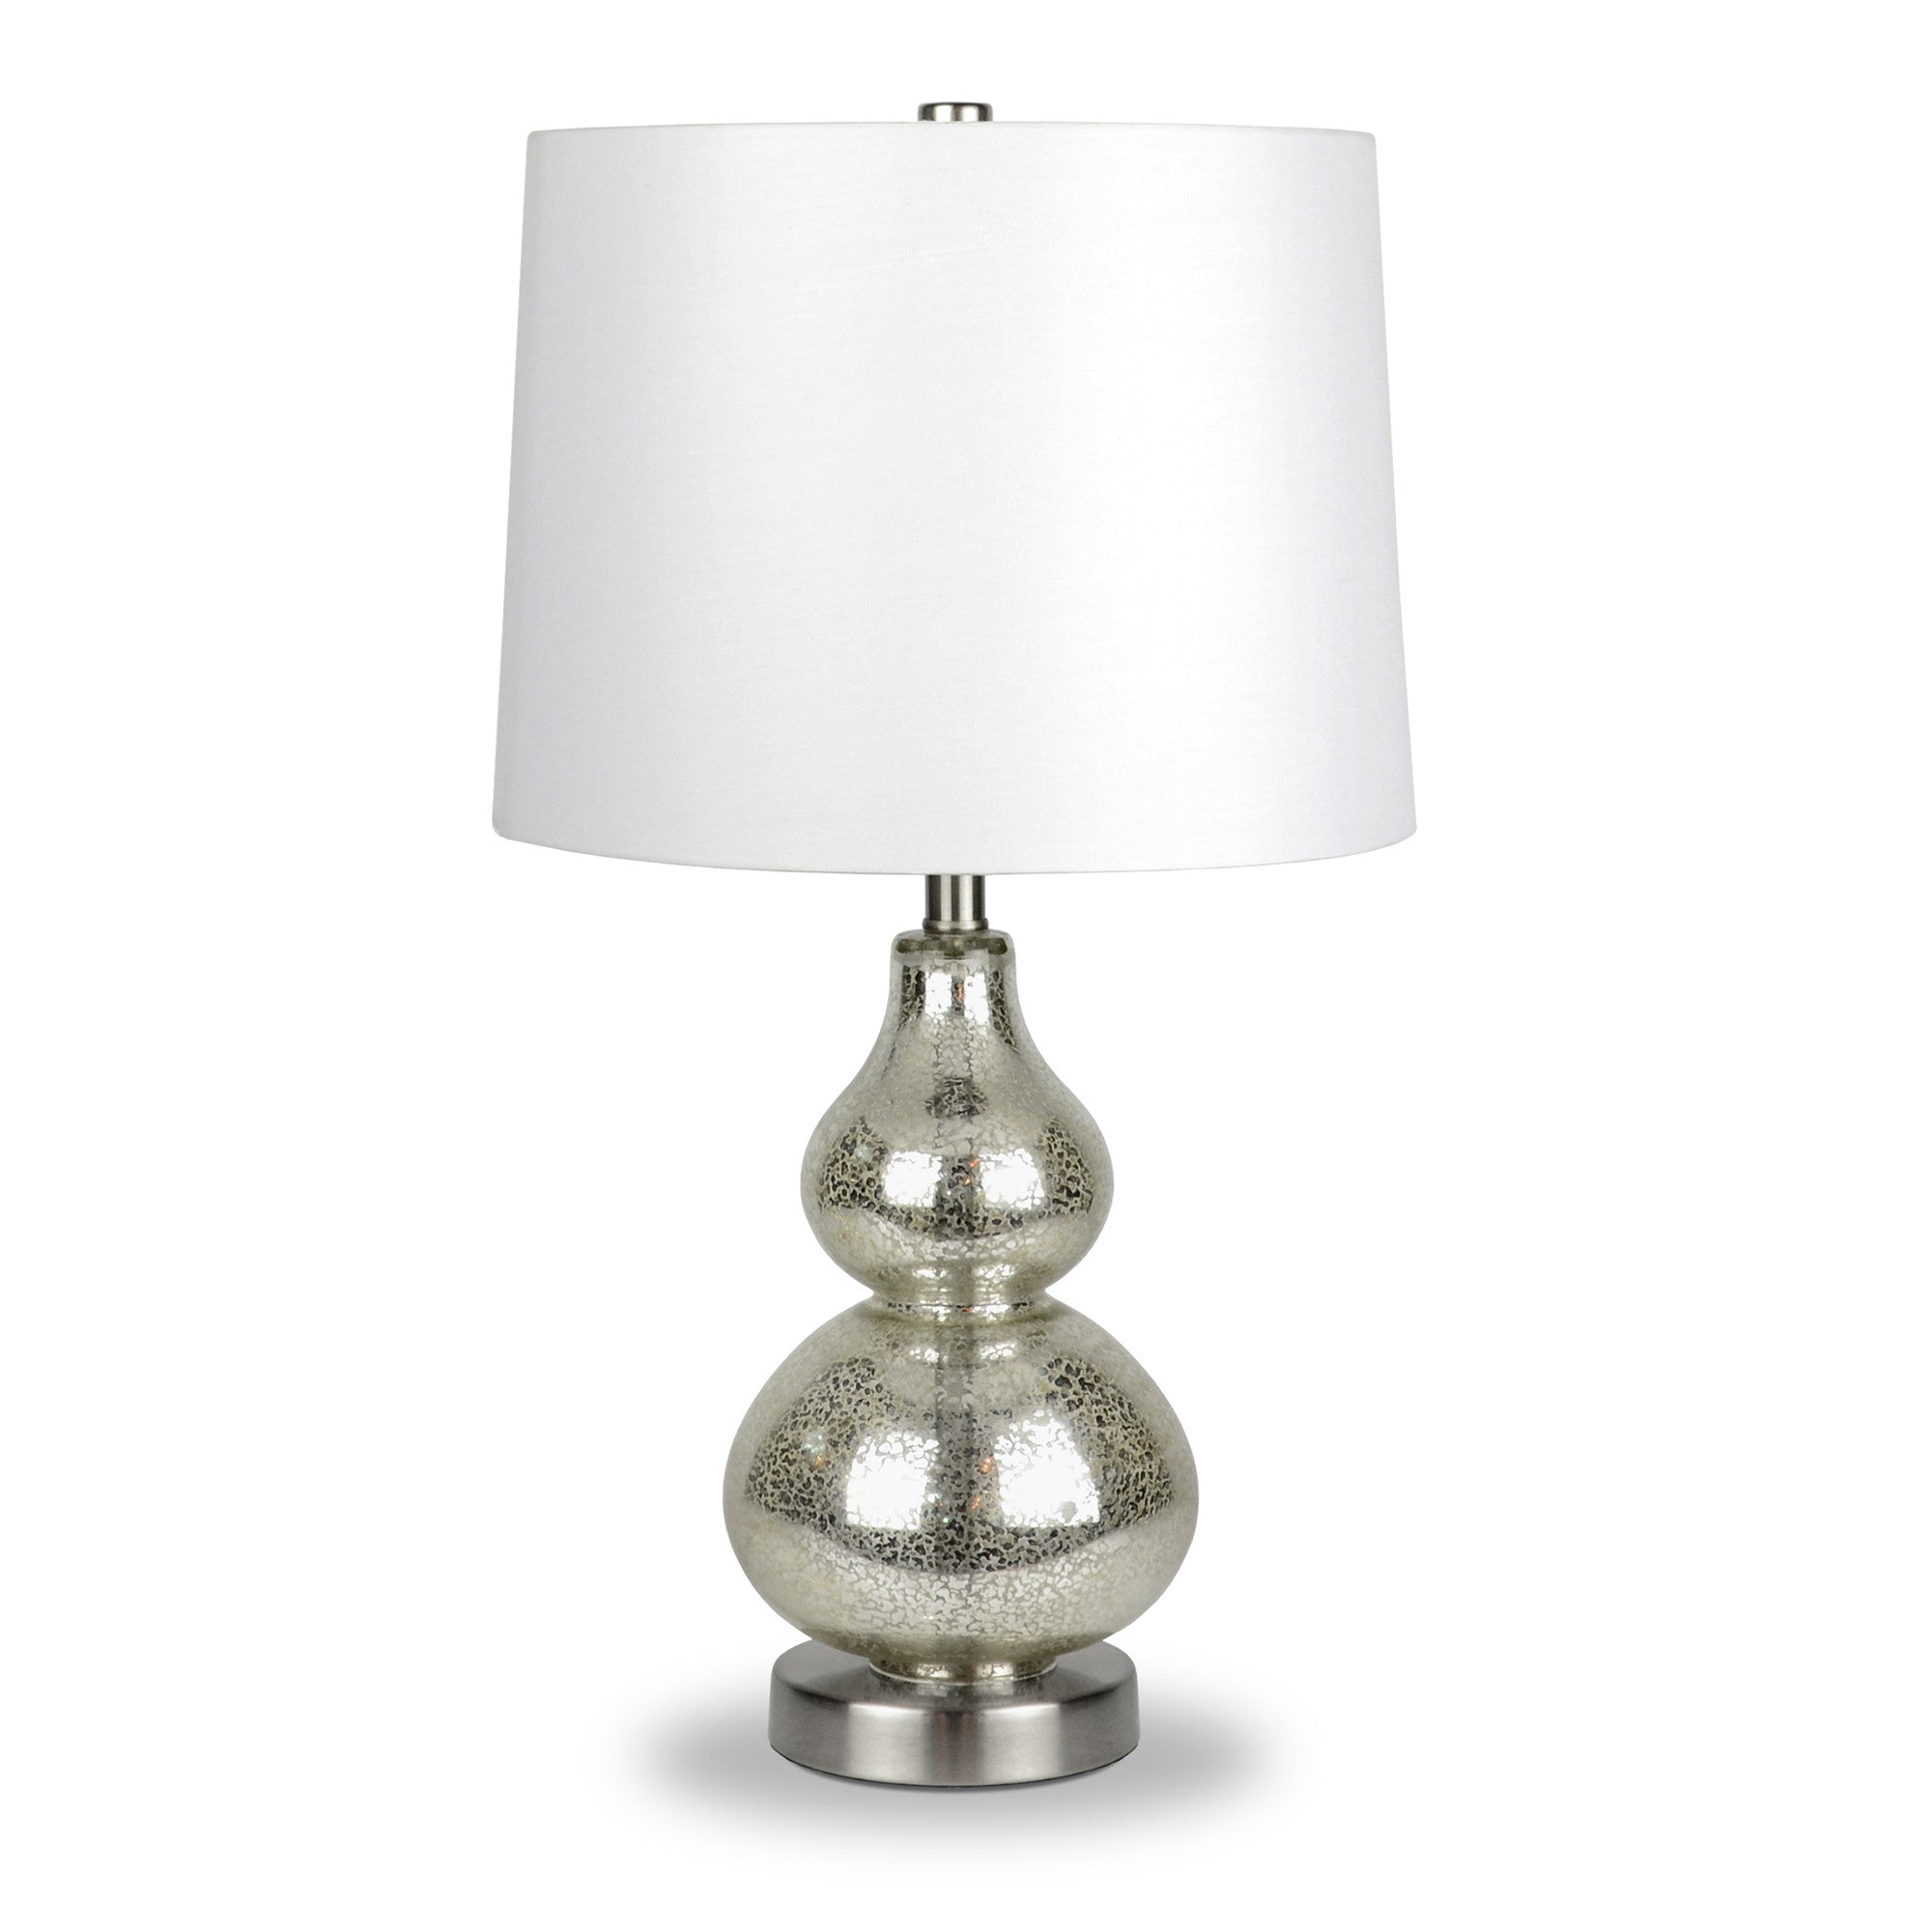 21" Nickel Glass Table Lamp With White Drum Shade